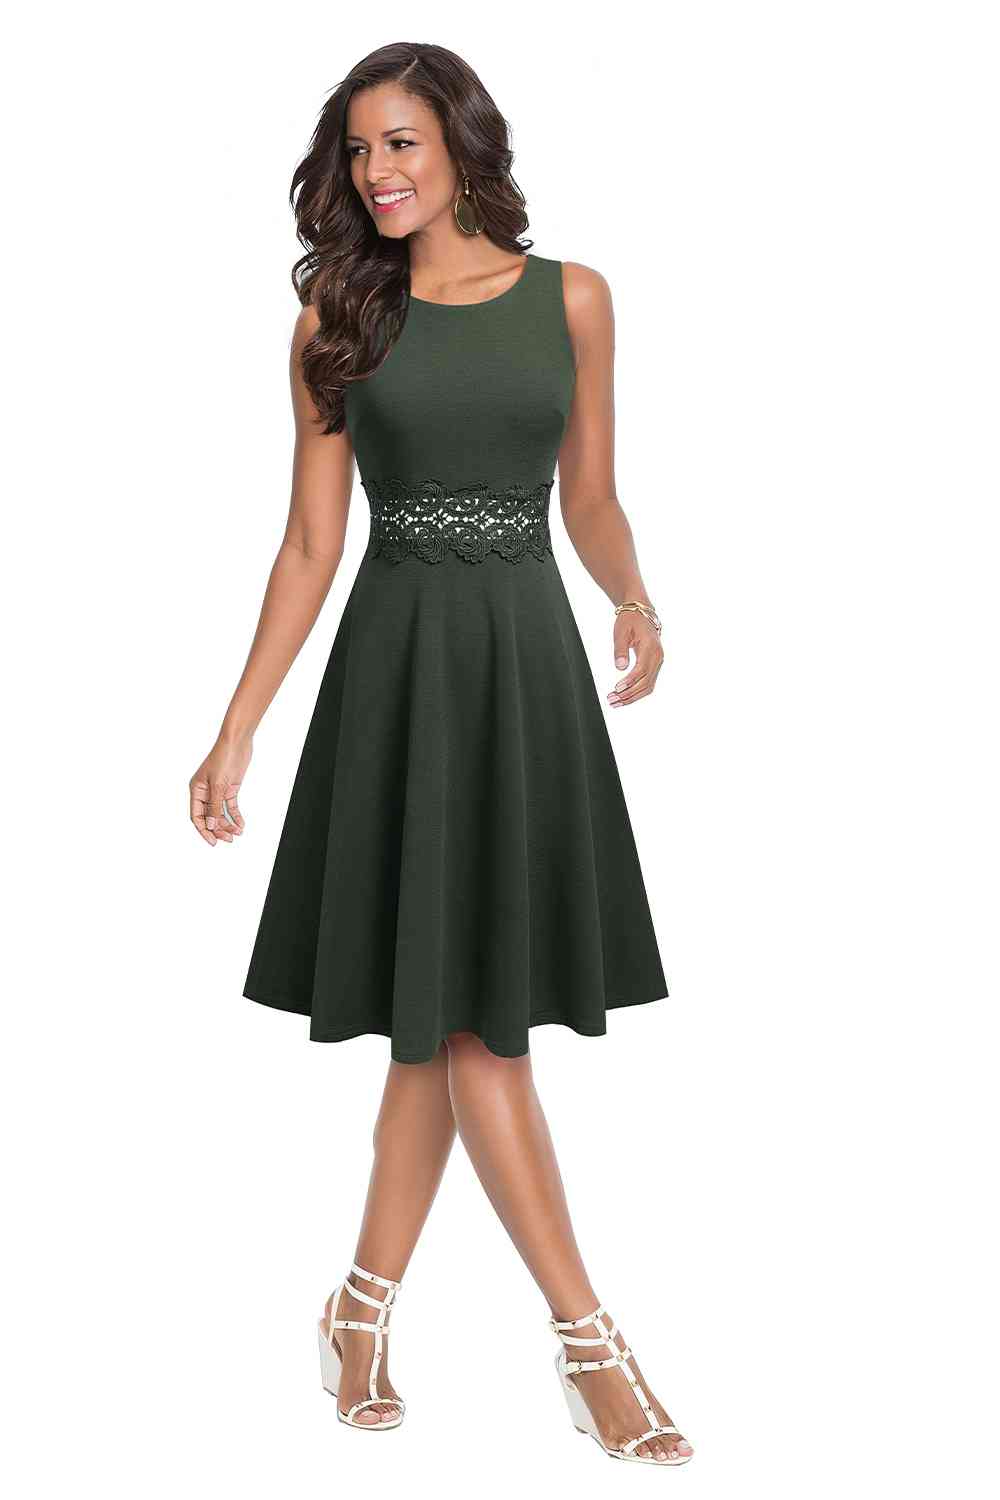 Round Neck Sleeveless Lace Trim Dress - Army Green / S - All Dresses - Dresses - 7 - 2024